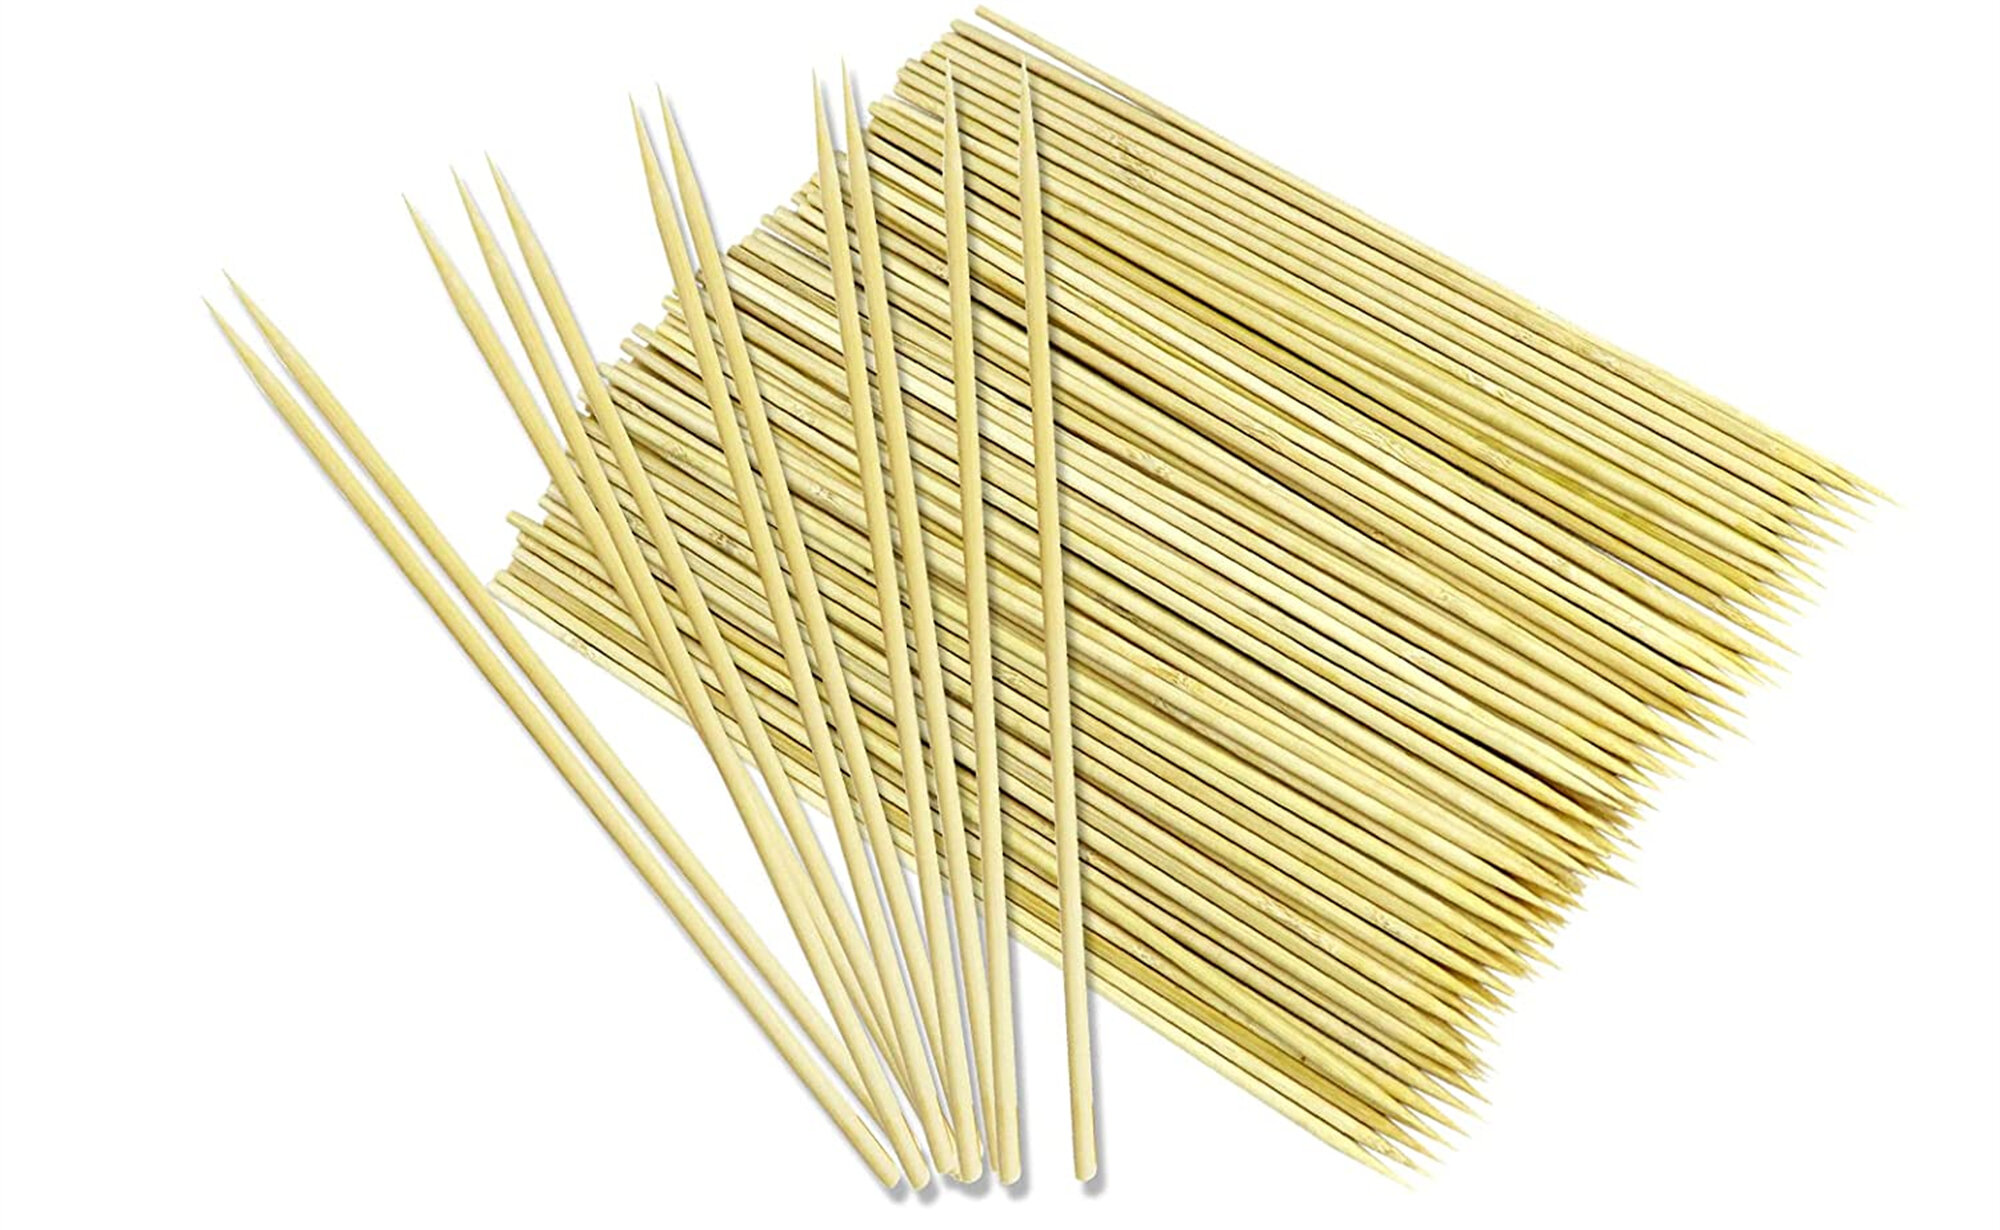 5mm Thick Natural Semi Point Bamboo Sticks BBQ Caramel Candy Apple Sticks for Corn Dog,Corn Cob,Cookie,Lollipop,Kabob,Gril. 5.5 Inch Study Bamboo Skewers 100 pcs